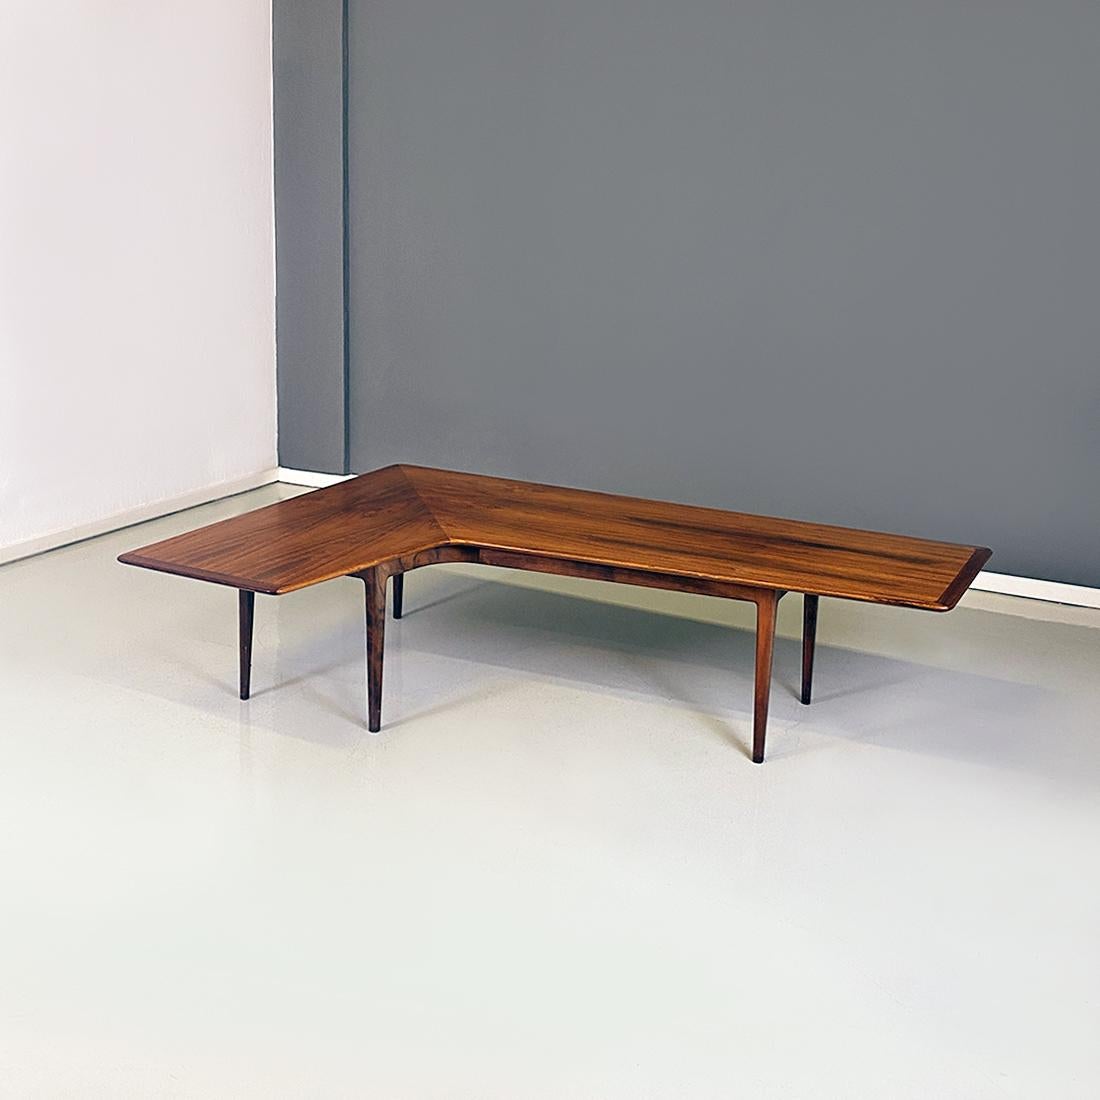 Italian Mid-Century Modern Solid Wood Coffee Table with a Boomerang Shape, 1960s 6